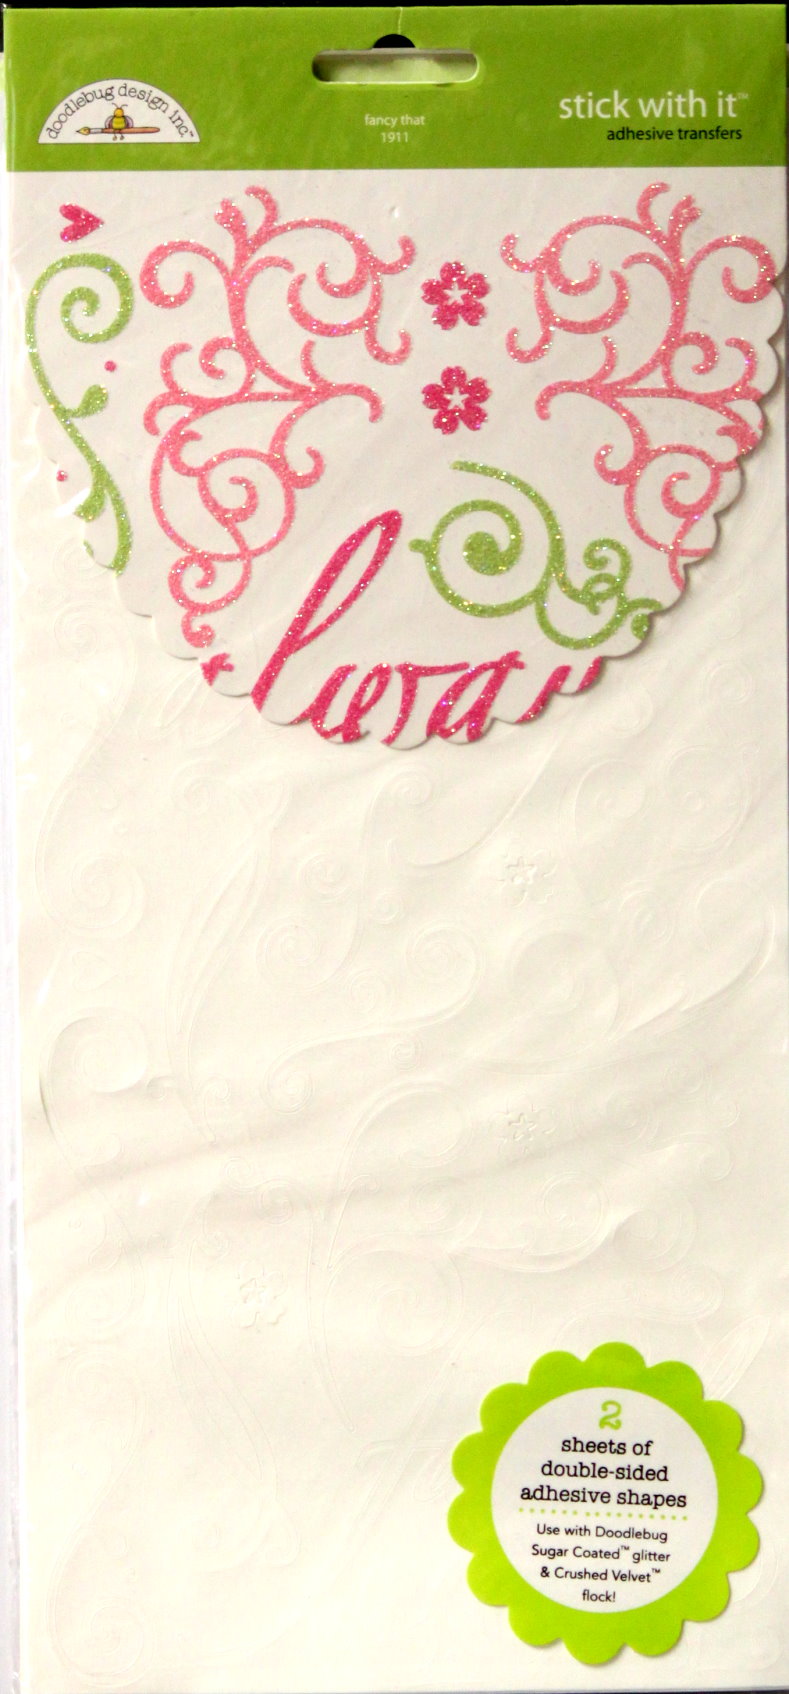 Doodlebug Design Inc. Fancy That Stick With It Adhesive  Rub-on Transfers Embellishments